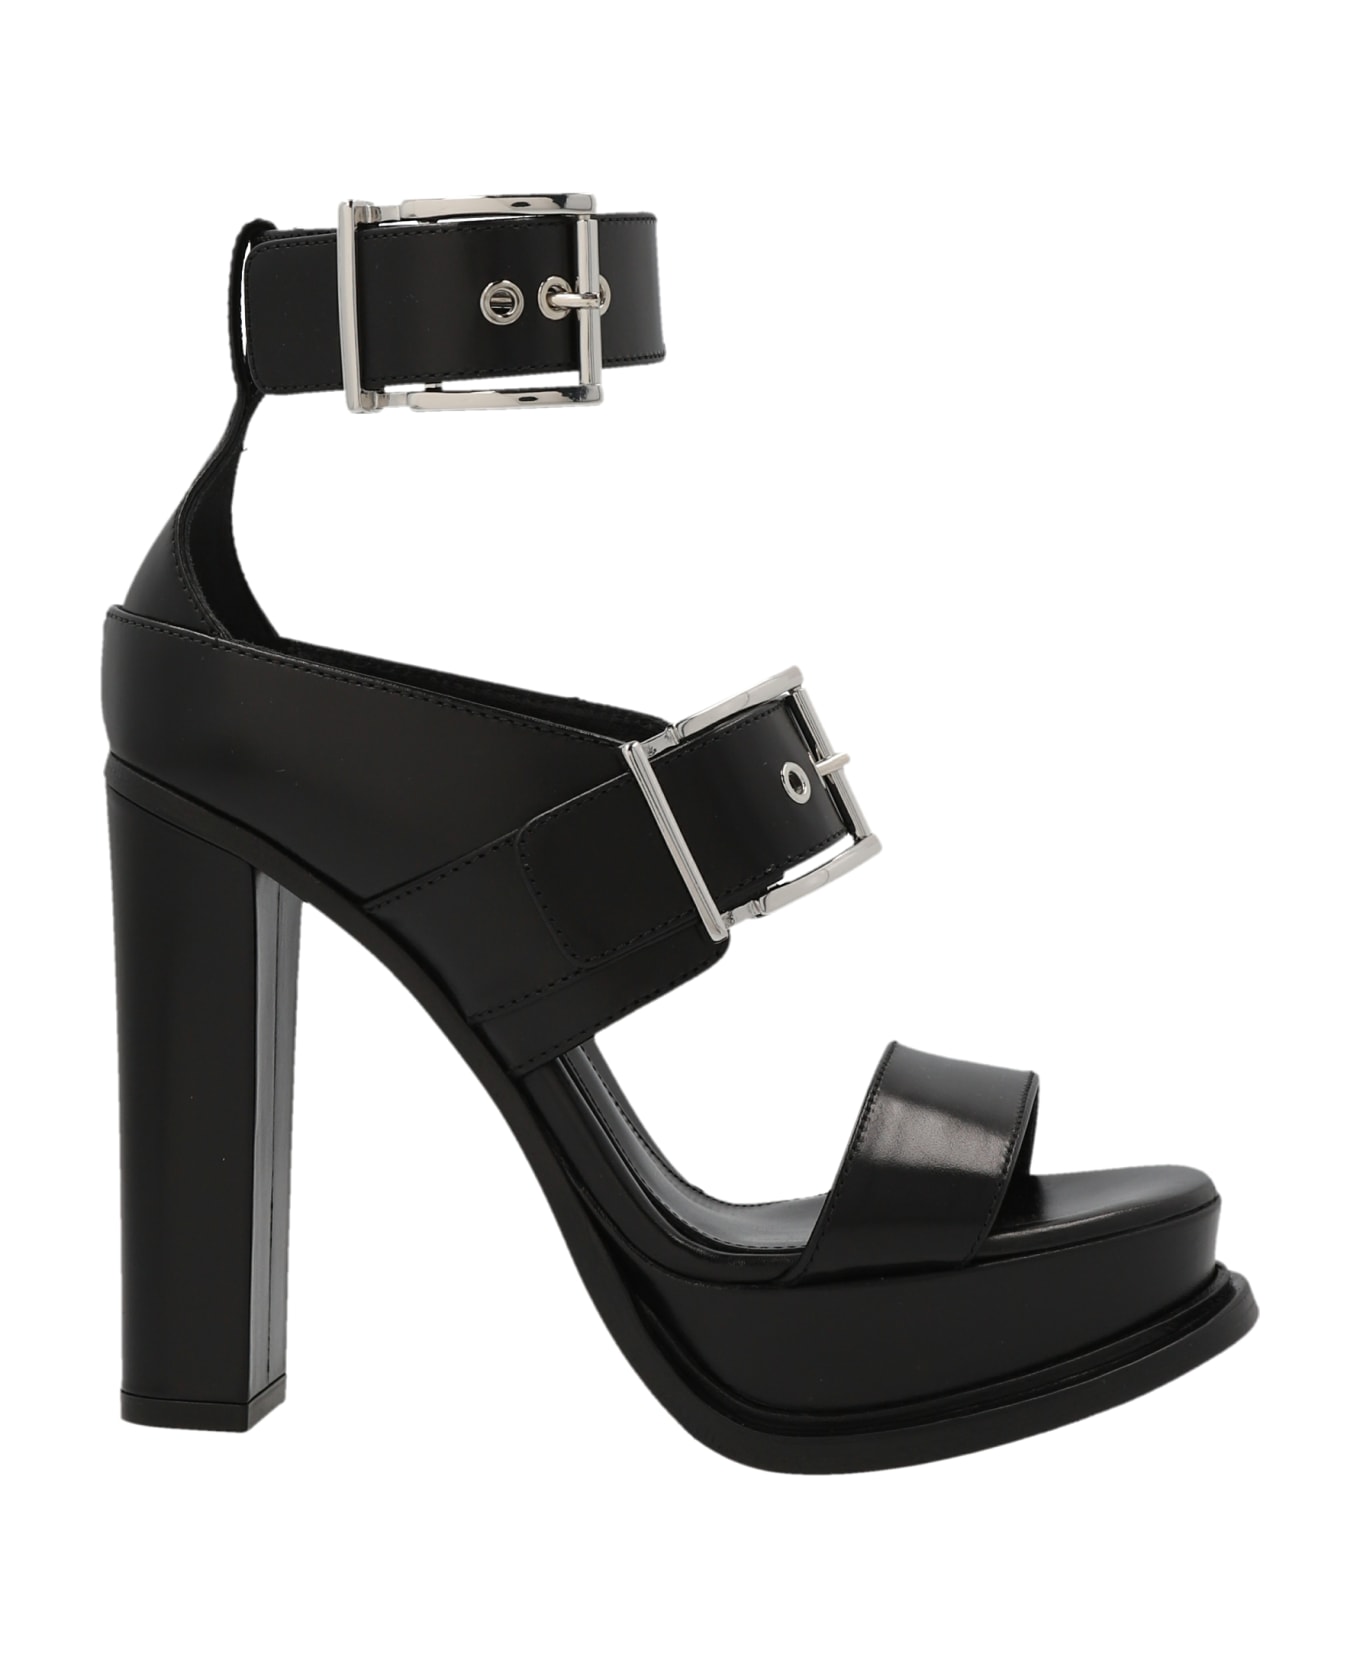 Alexander McQueen Platform Sandal With Buckles In Black And Silver - Black Silver